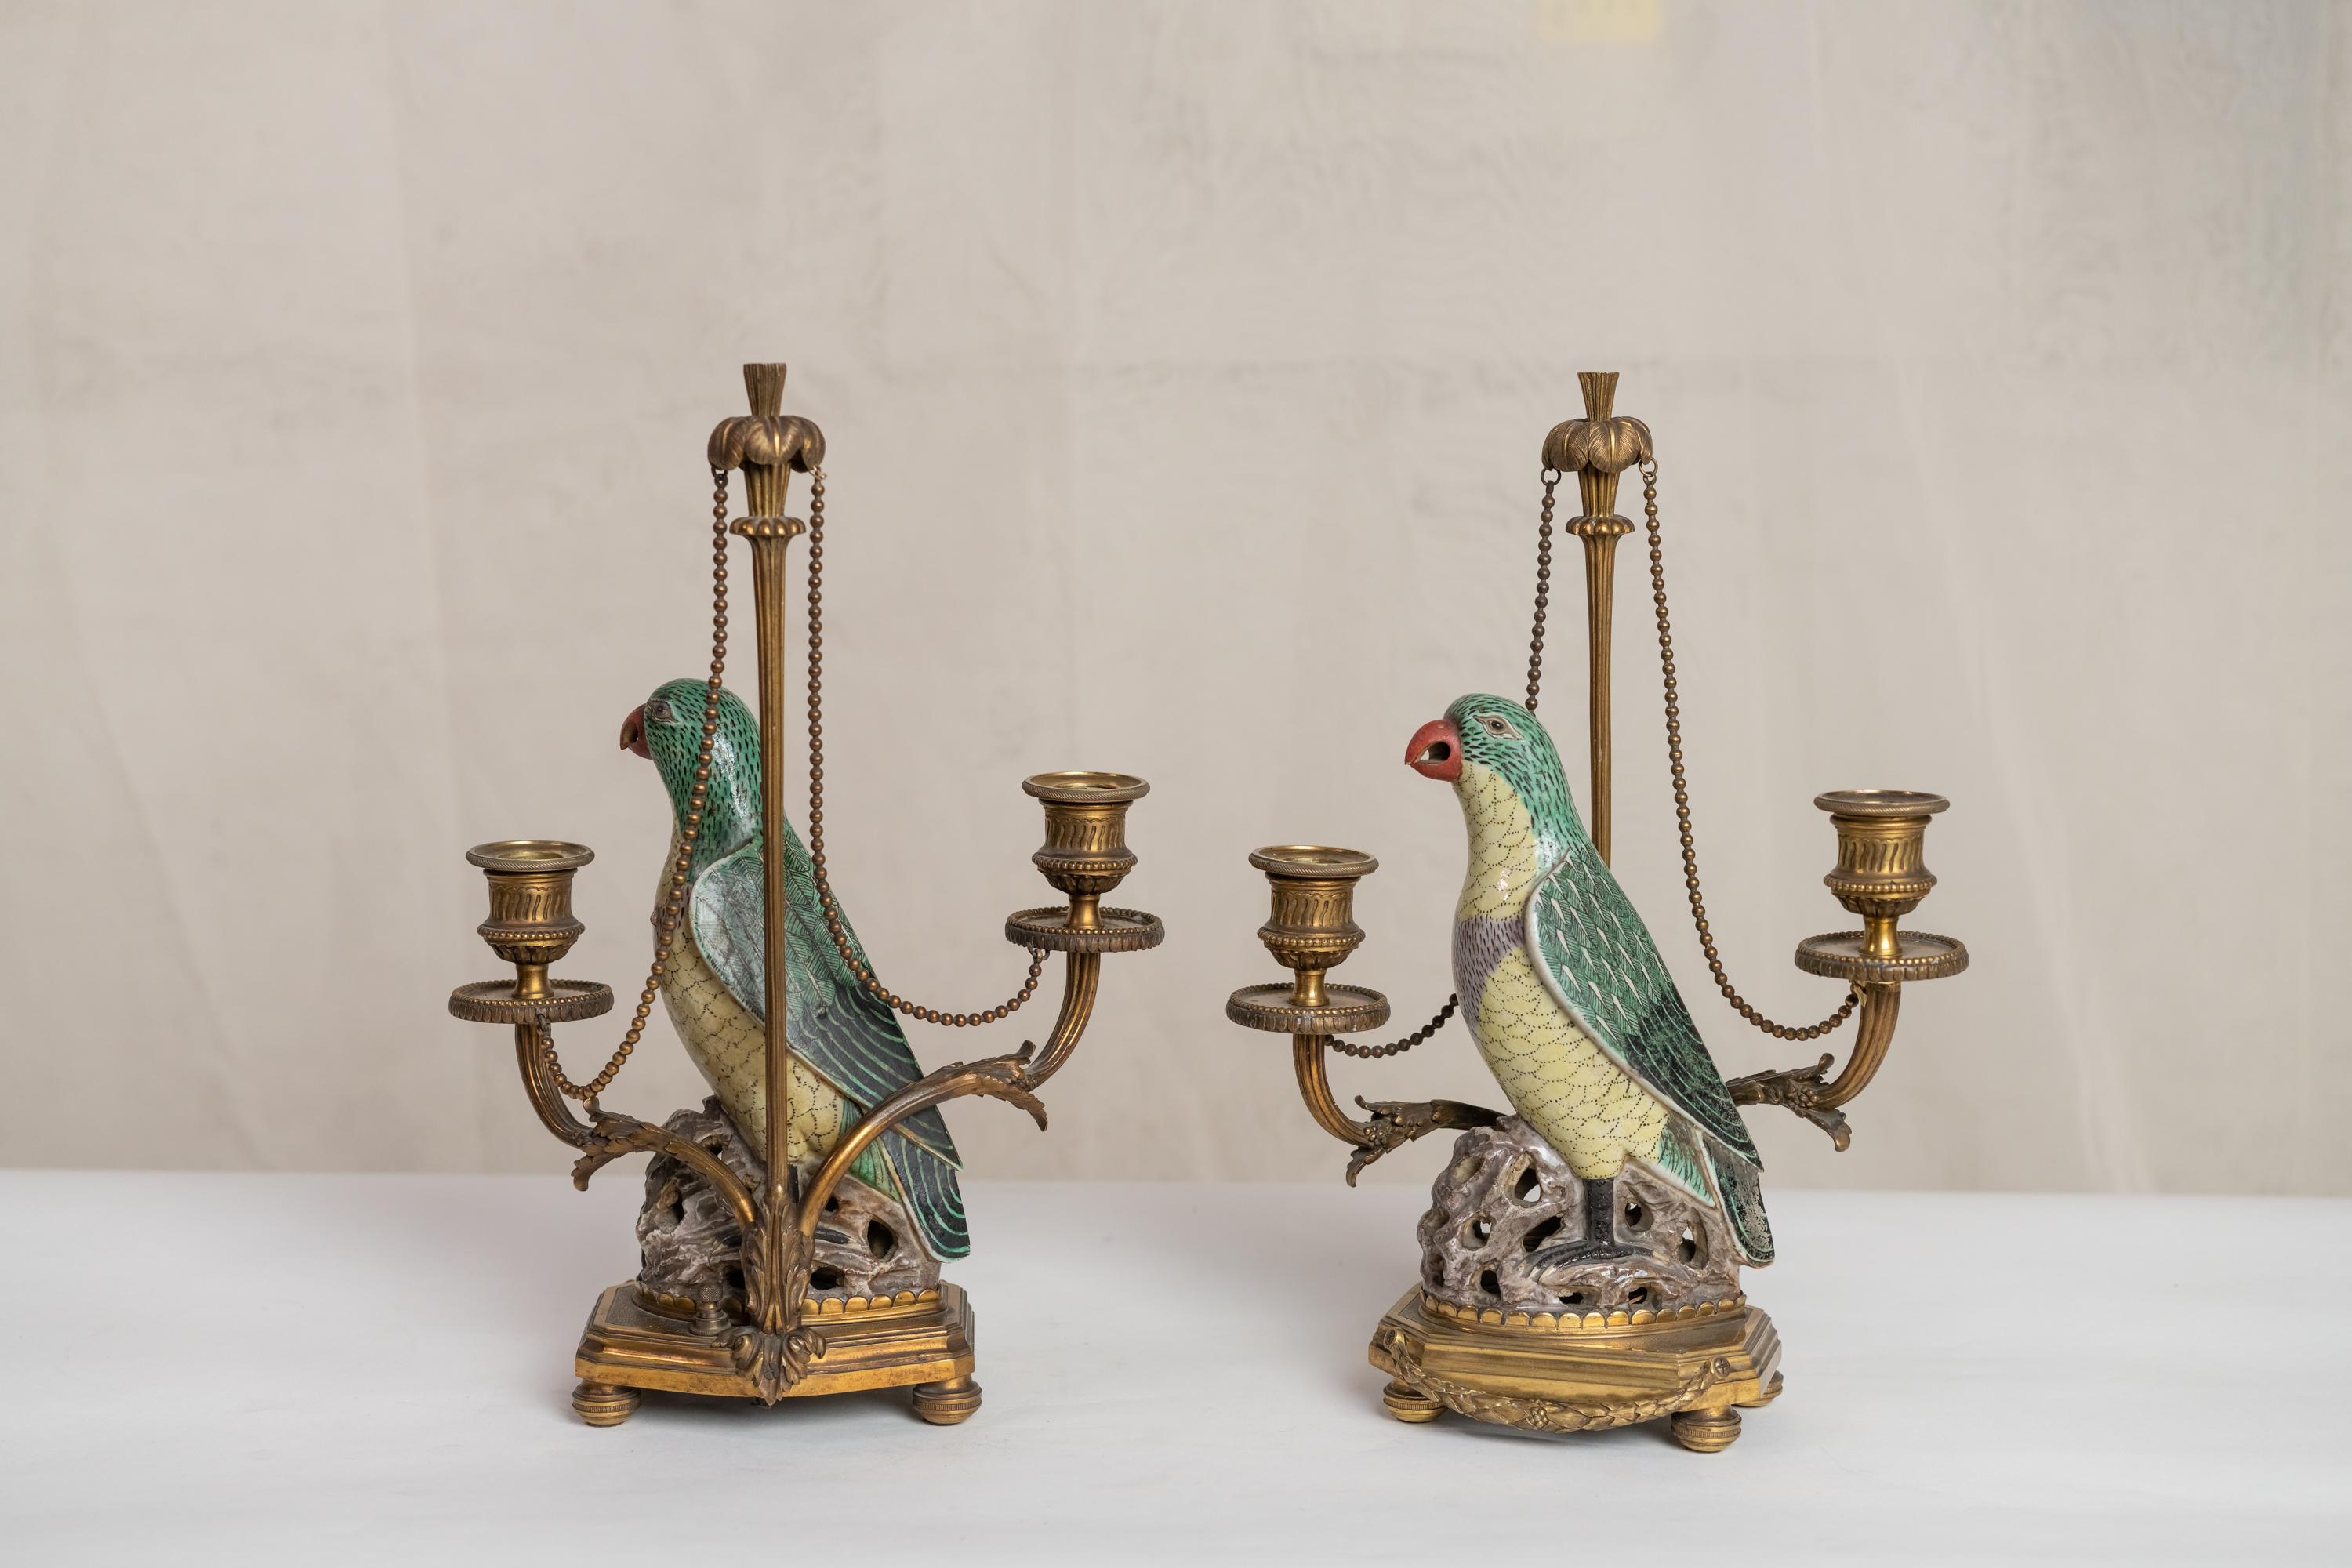 Rare pair of 18th century-19th century Chinese porcelain parrots candelabra resting gilt bronze Louis XVI style bases.